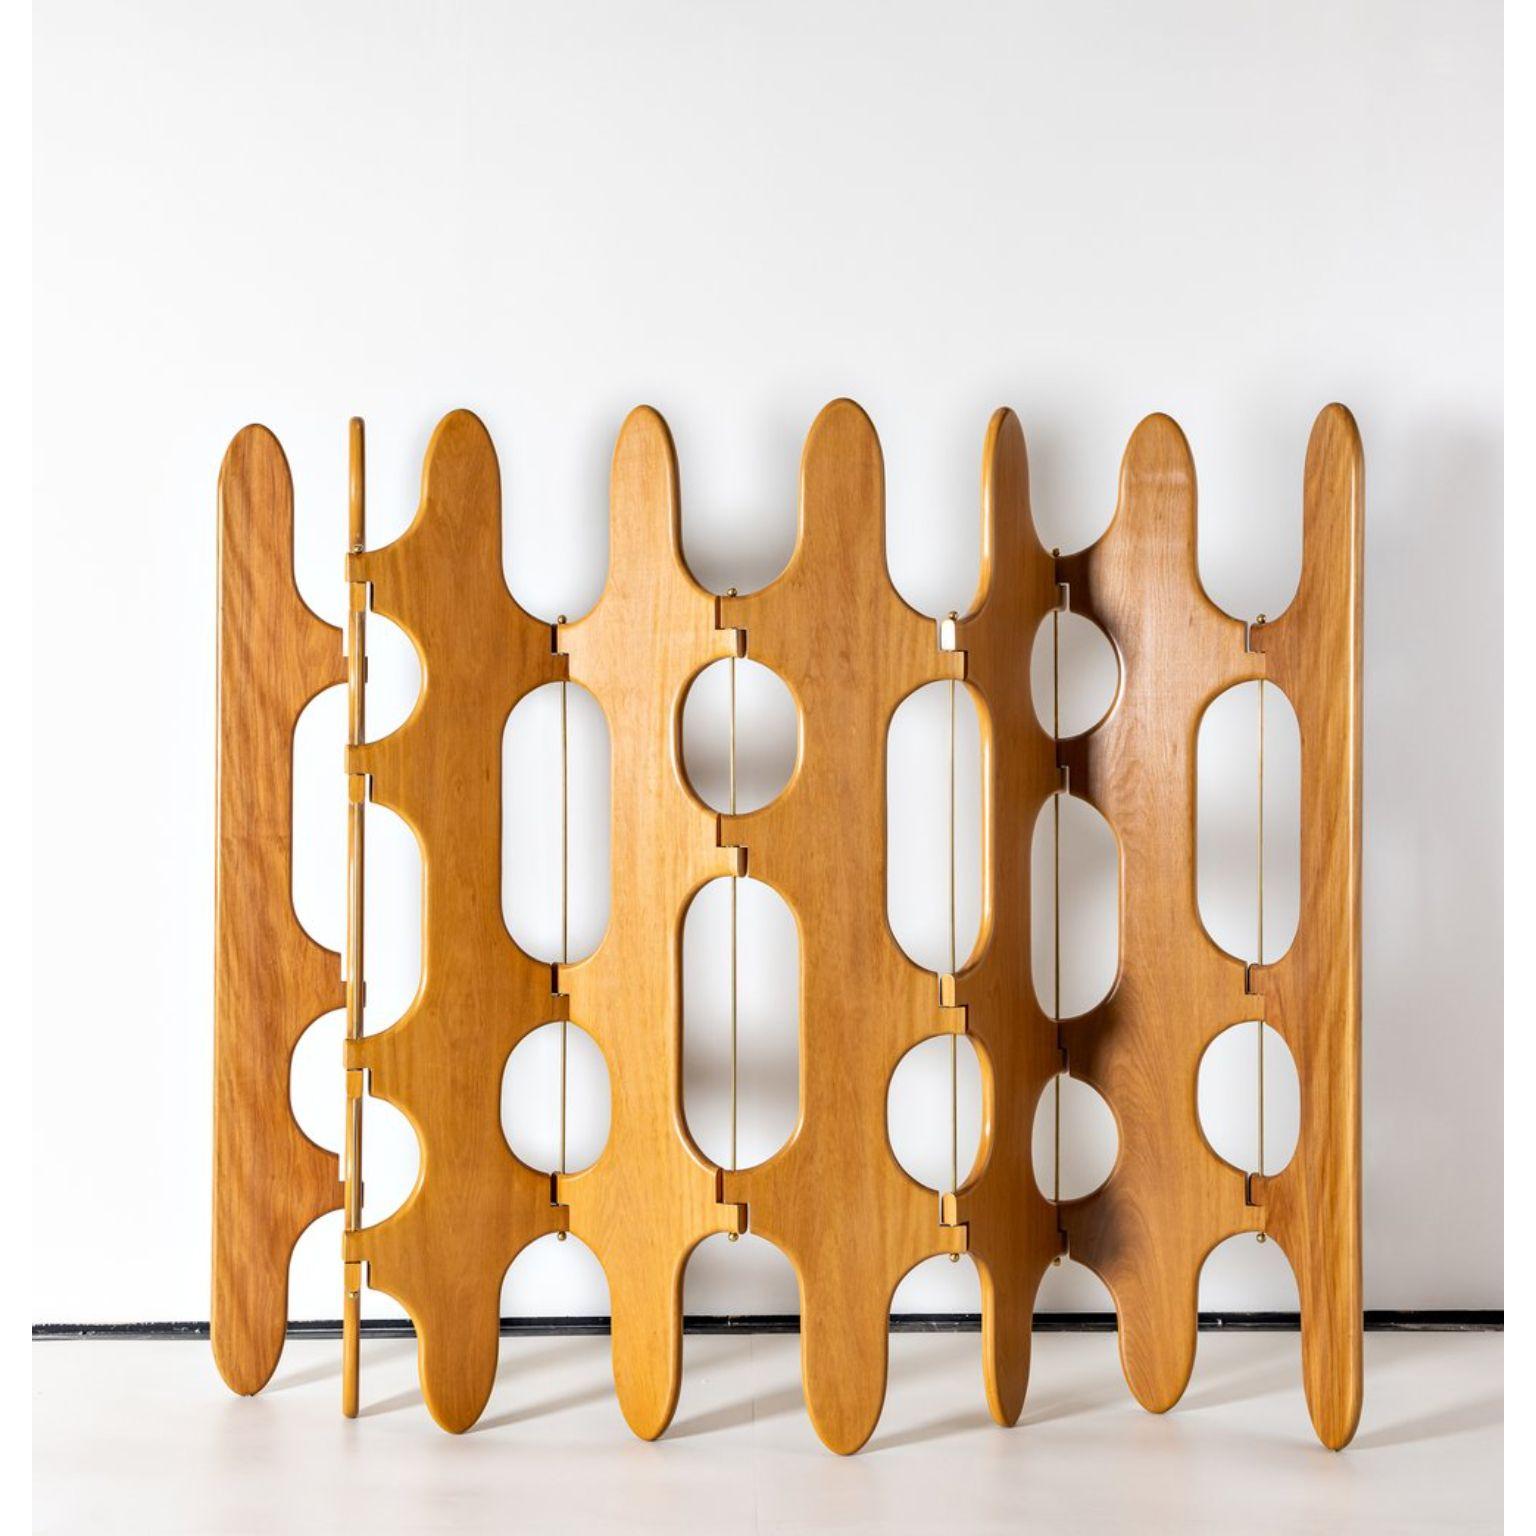 Cerca Screen by Alva Design
Dimensions: D 3 x W 290 x H 185 cm.
Materials: Solid wood (Peroba Mica) and brass.

Available in different wood options. The lenght is for the fully extended screen. Please contact us.

One counter stool, one